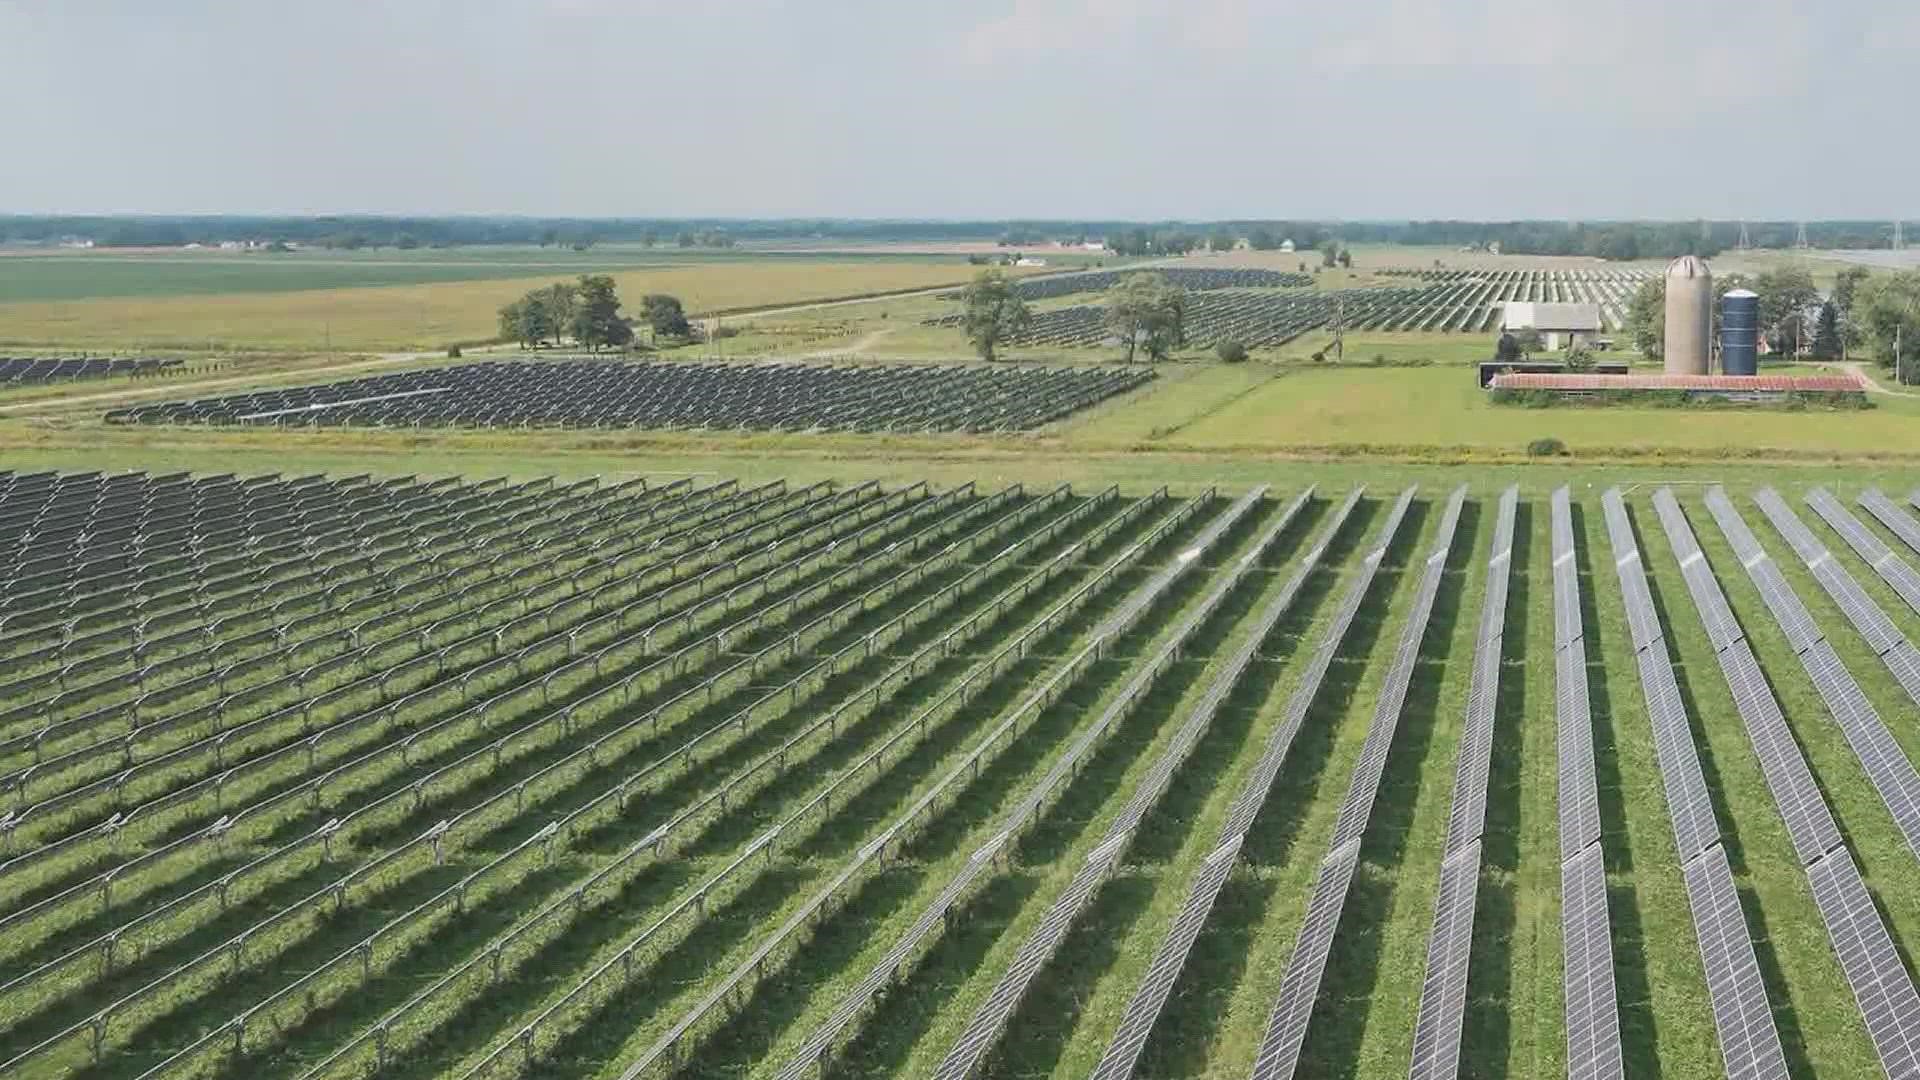 The proposed $250 million solar project would be built on 1,500 acres of land near Grand Mound and generate enough energy to power 50,000 homes and businesses.